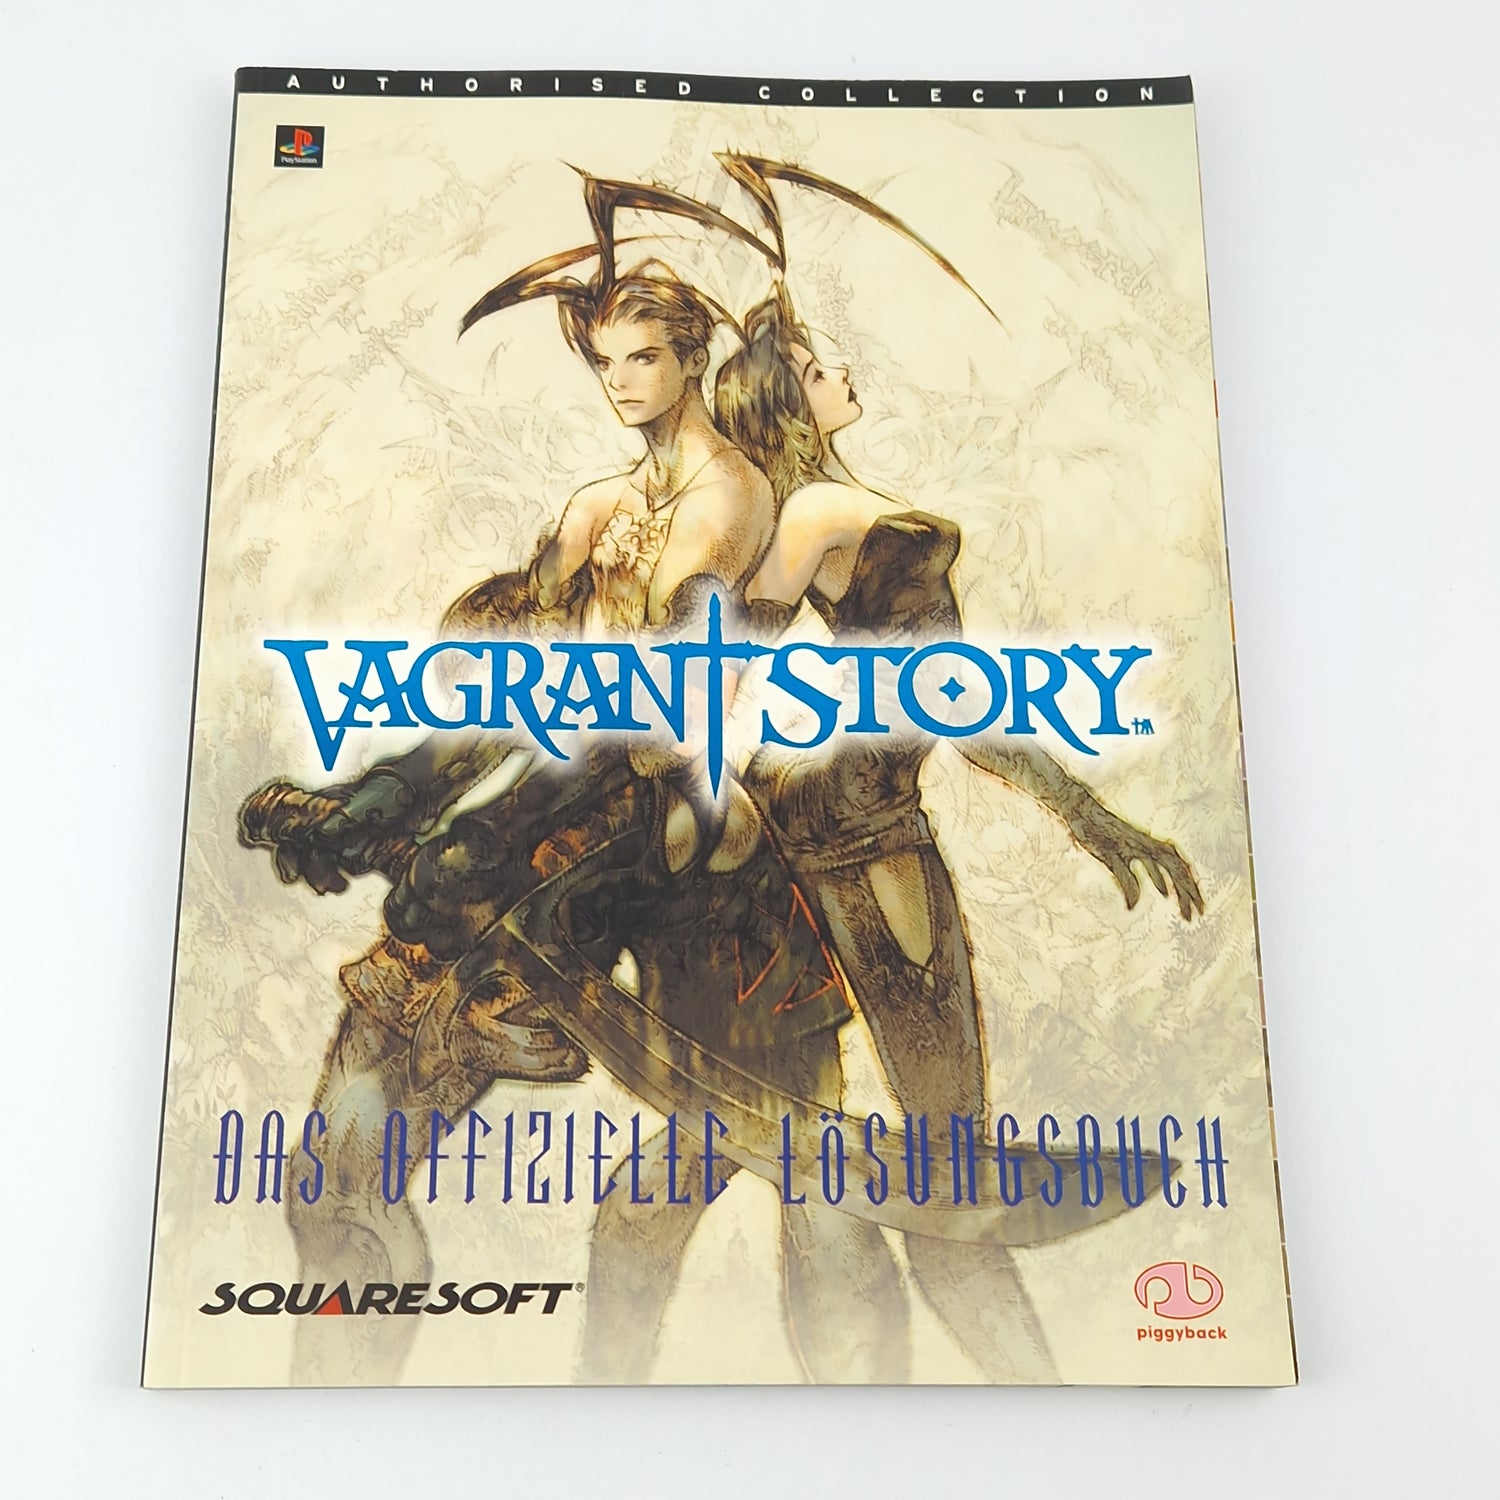 Playstation 1 Spiel : Vagrant Story - CD + Anleitung mit Lösungsbuch Guide PS1